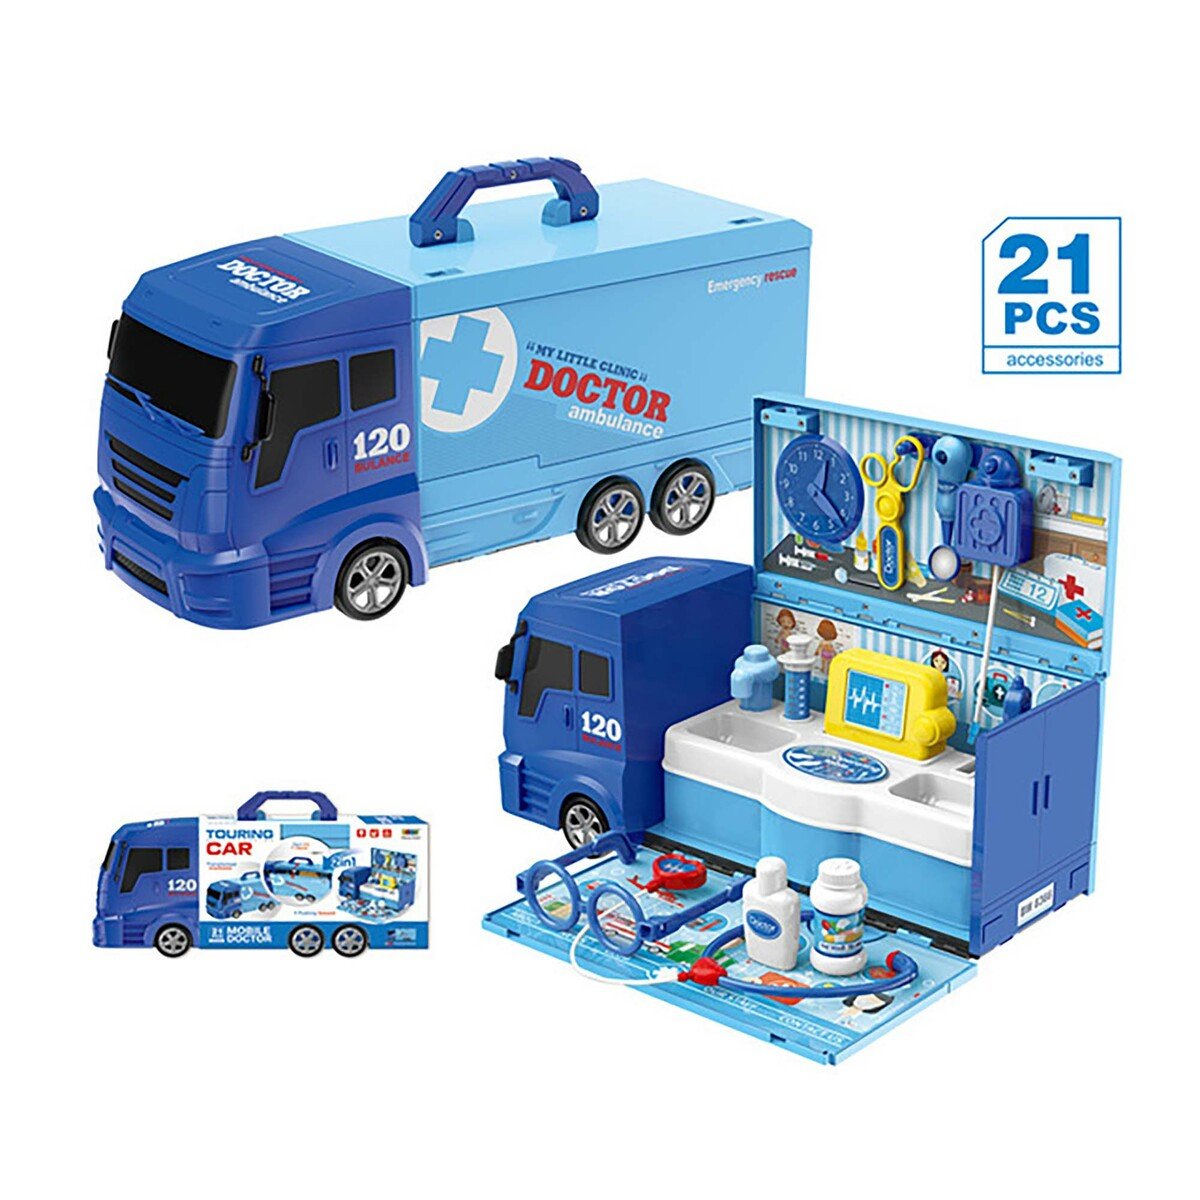 Bowa Mobile Doctor Truck Set 8366P